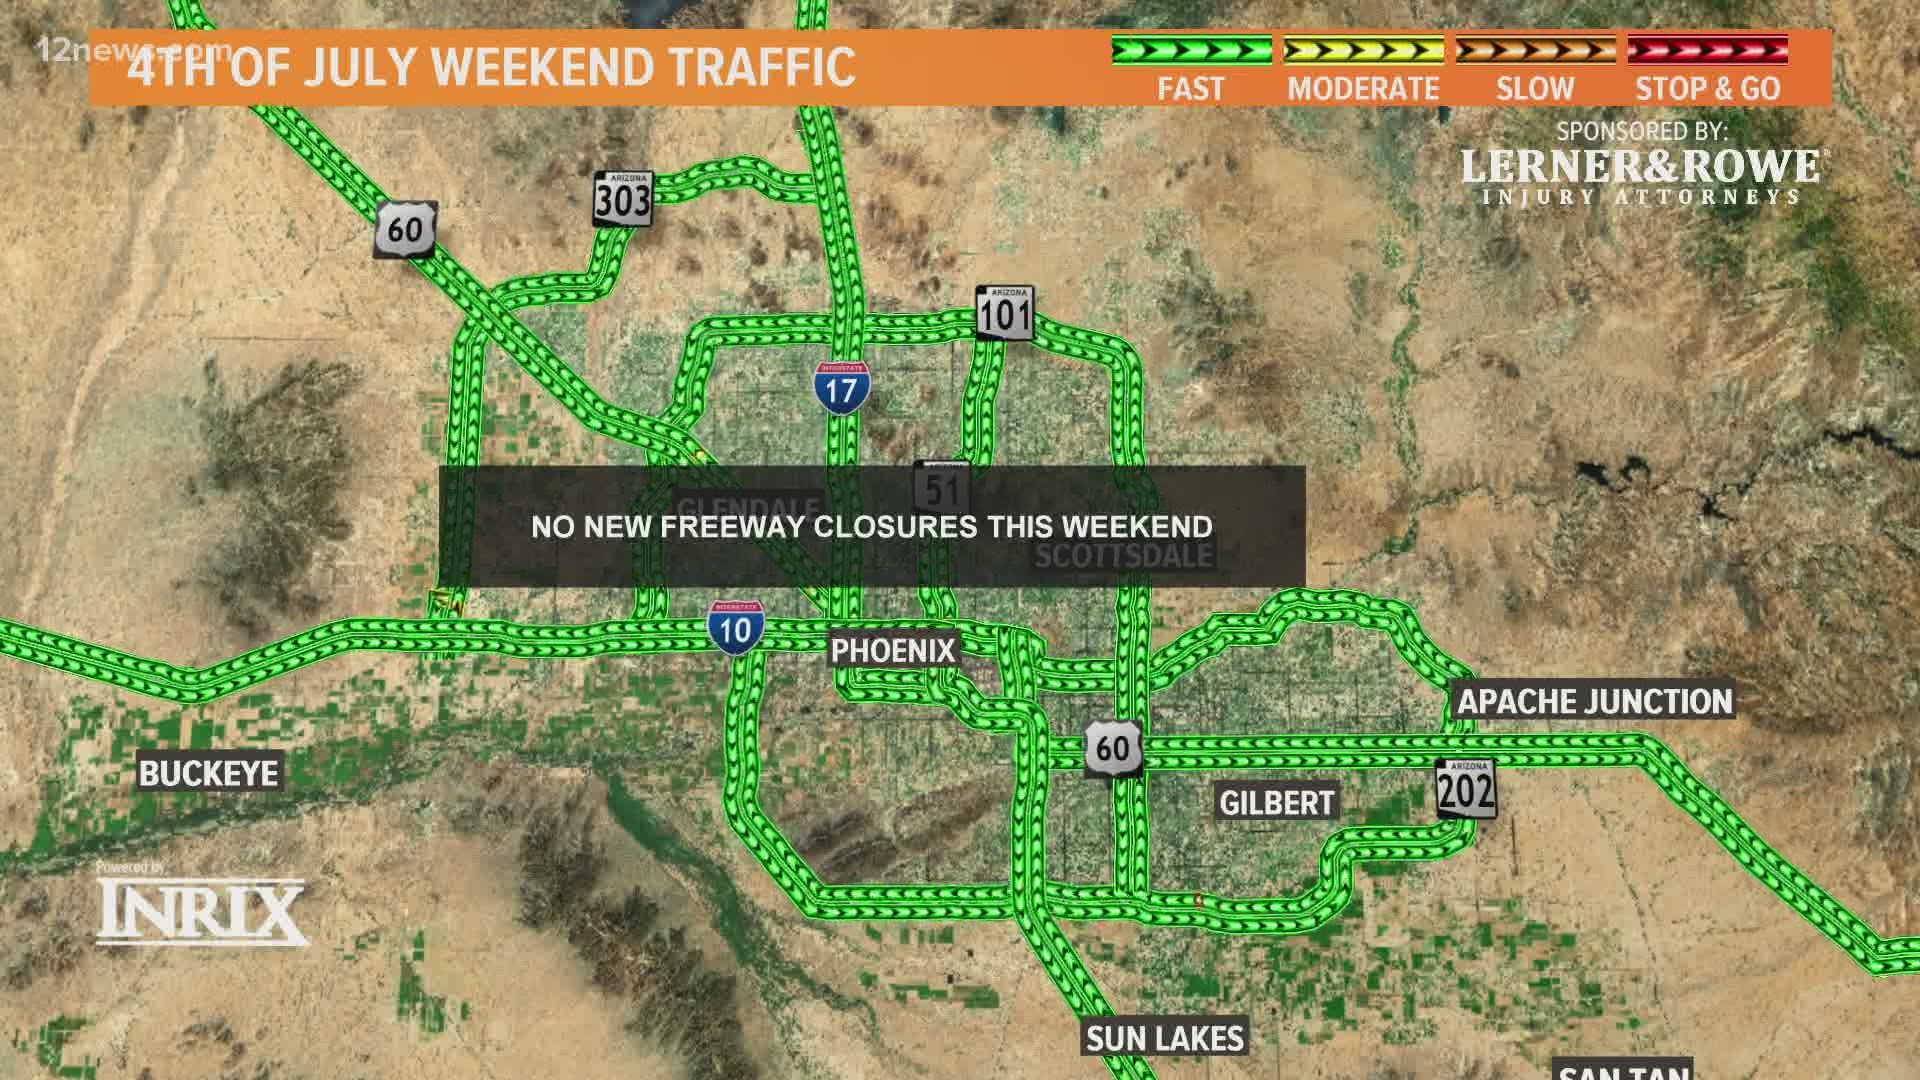 Vanessa Ramirez gives you an update on what's going on around Valley roads this weekend.